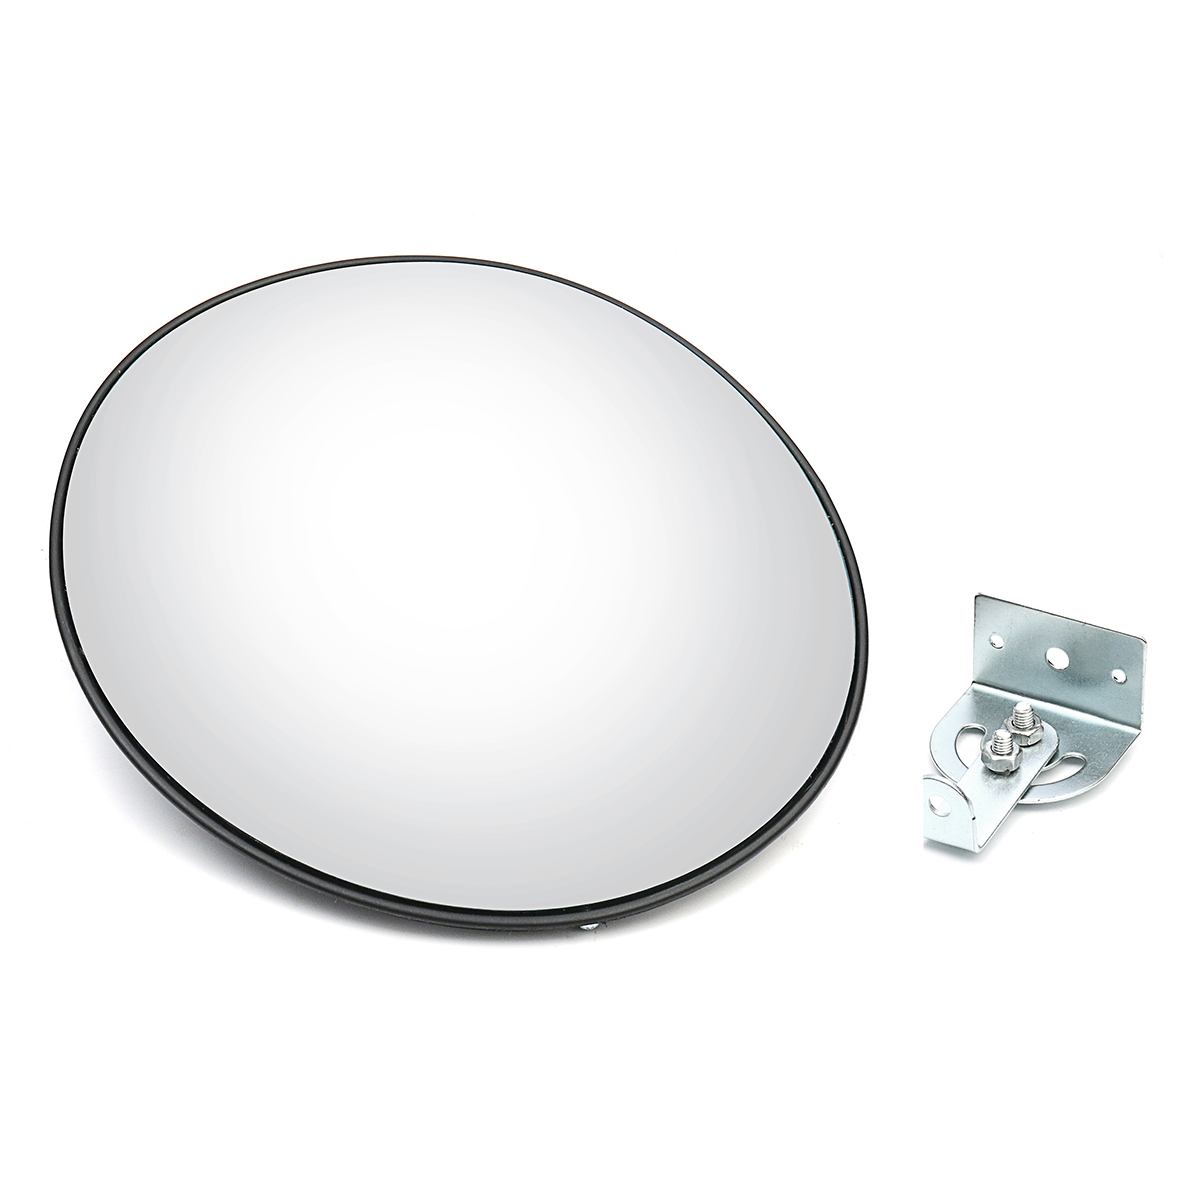 

30cm Wide Angle Security Curved Convex Road Traffic Mirrors Safety Driveway